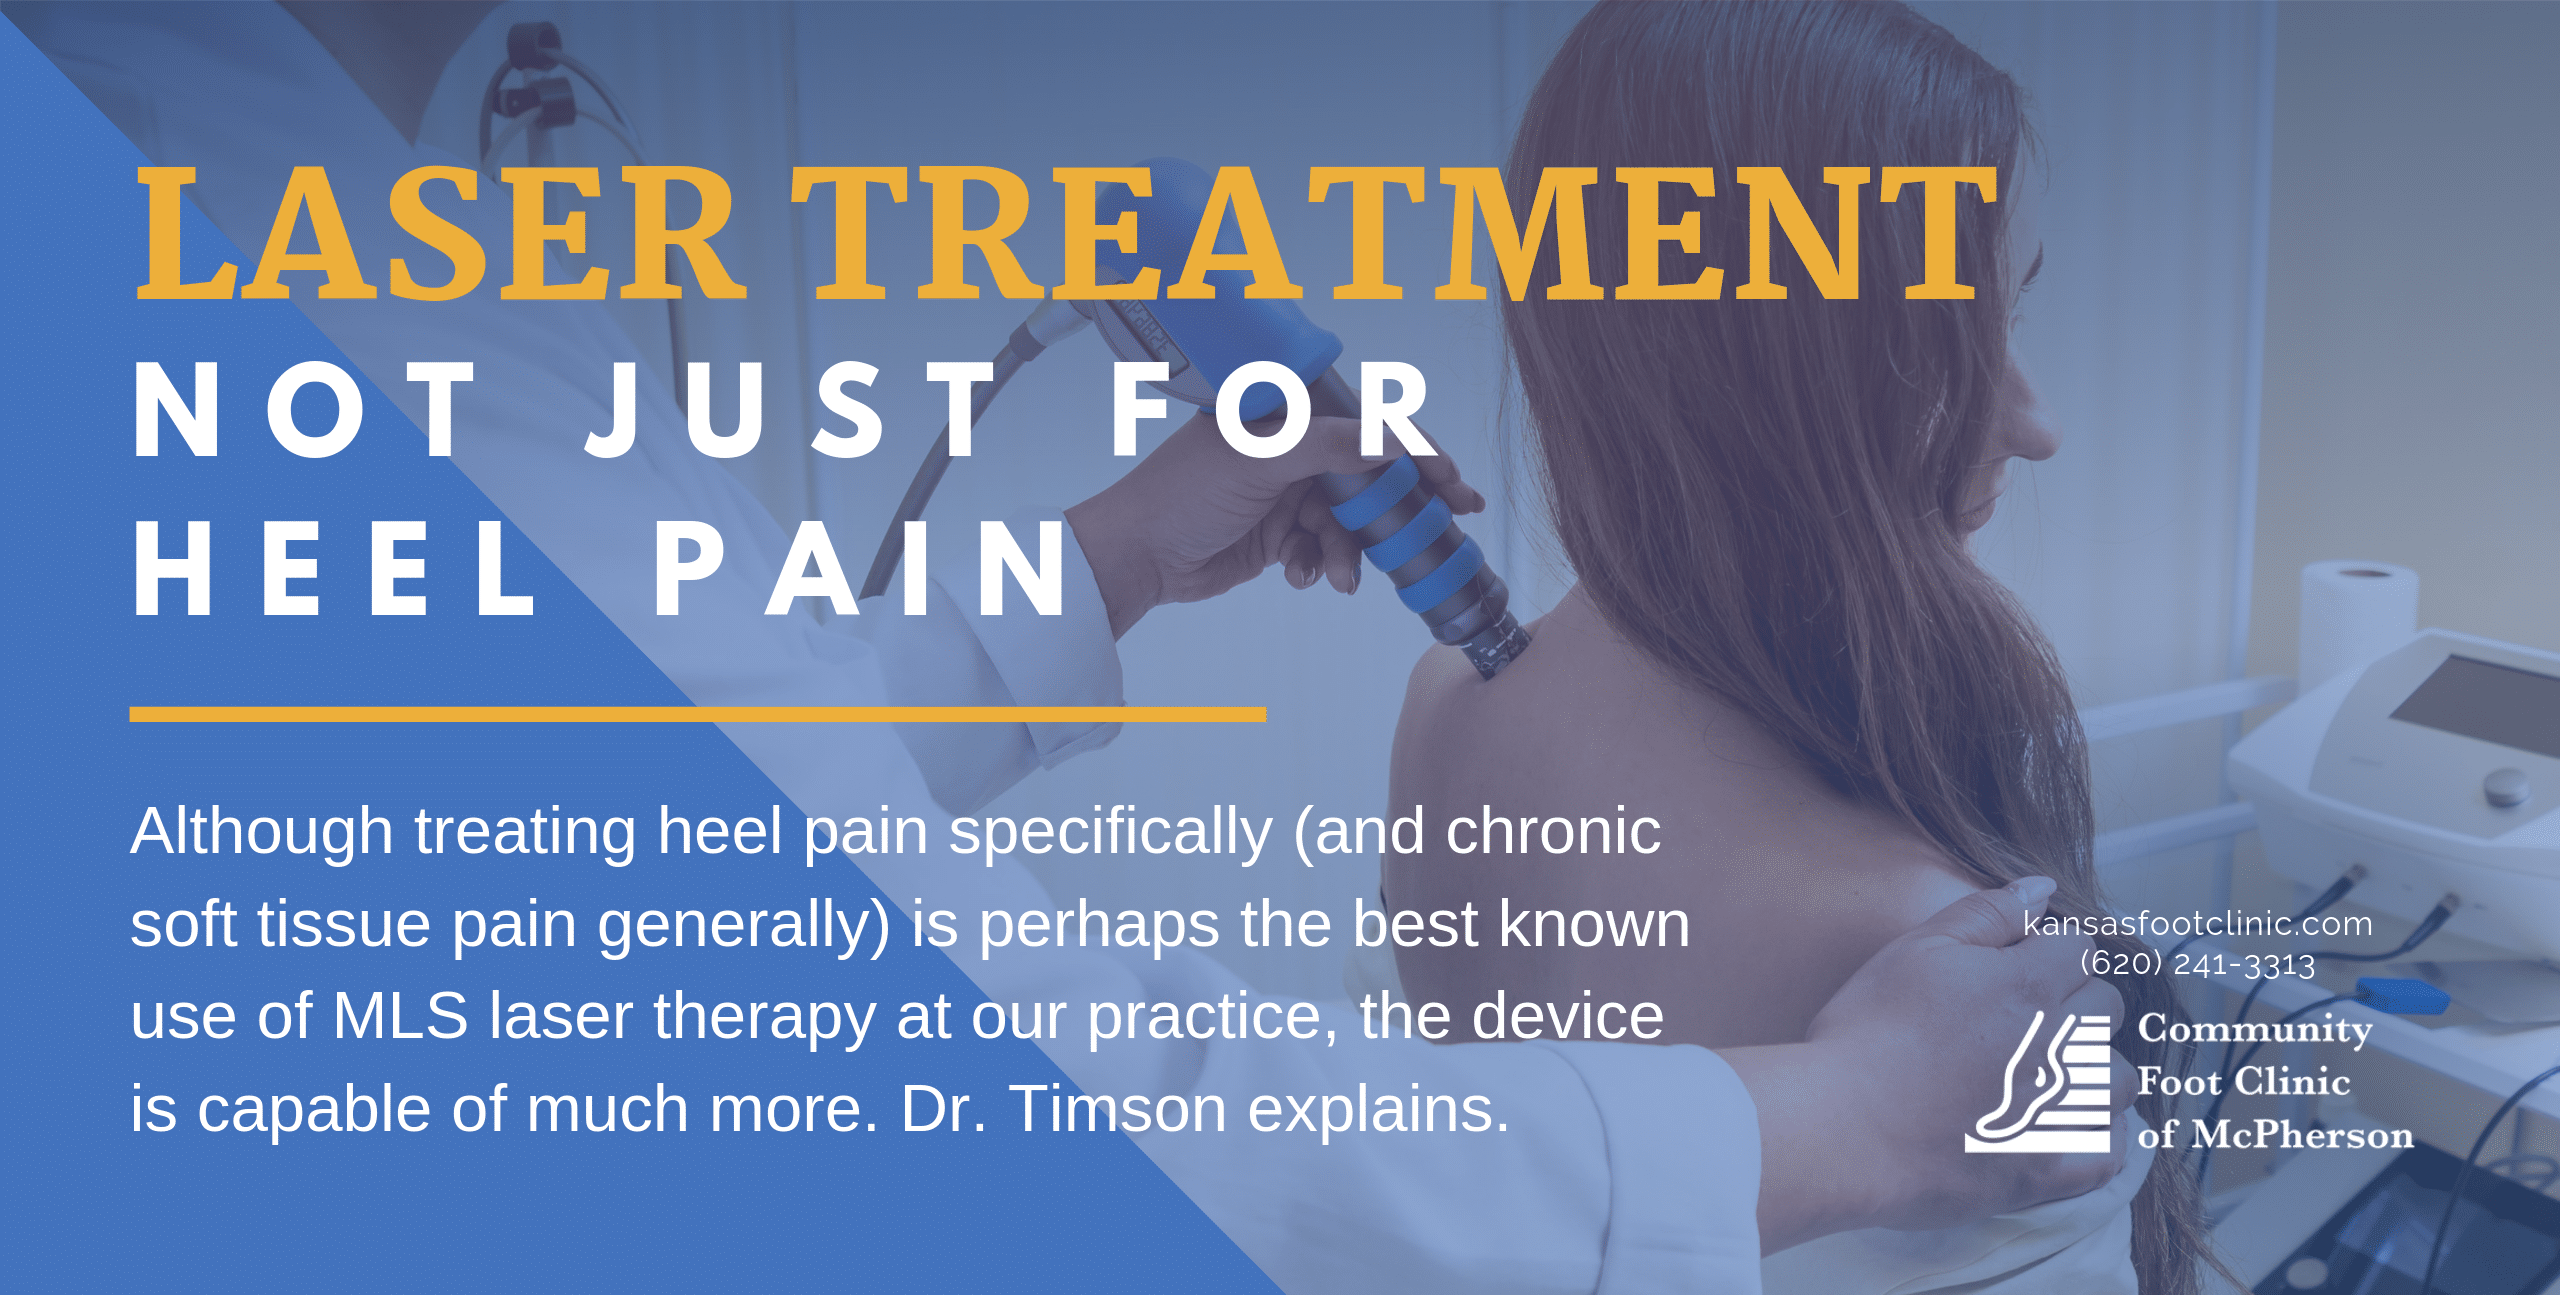 Dr. Timson - Laser Treatment For More Than Just Heel Pain